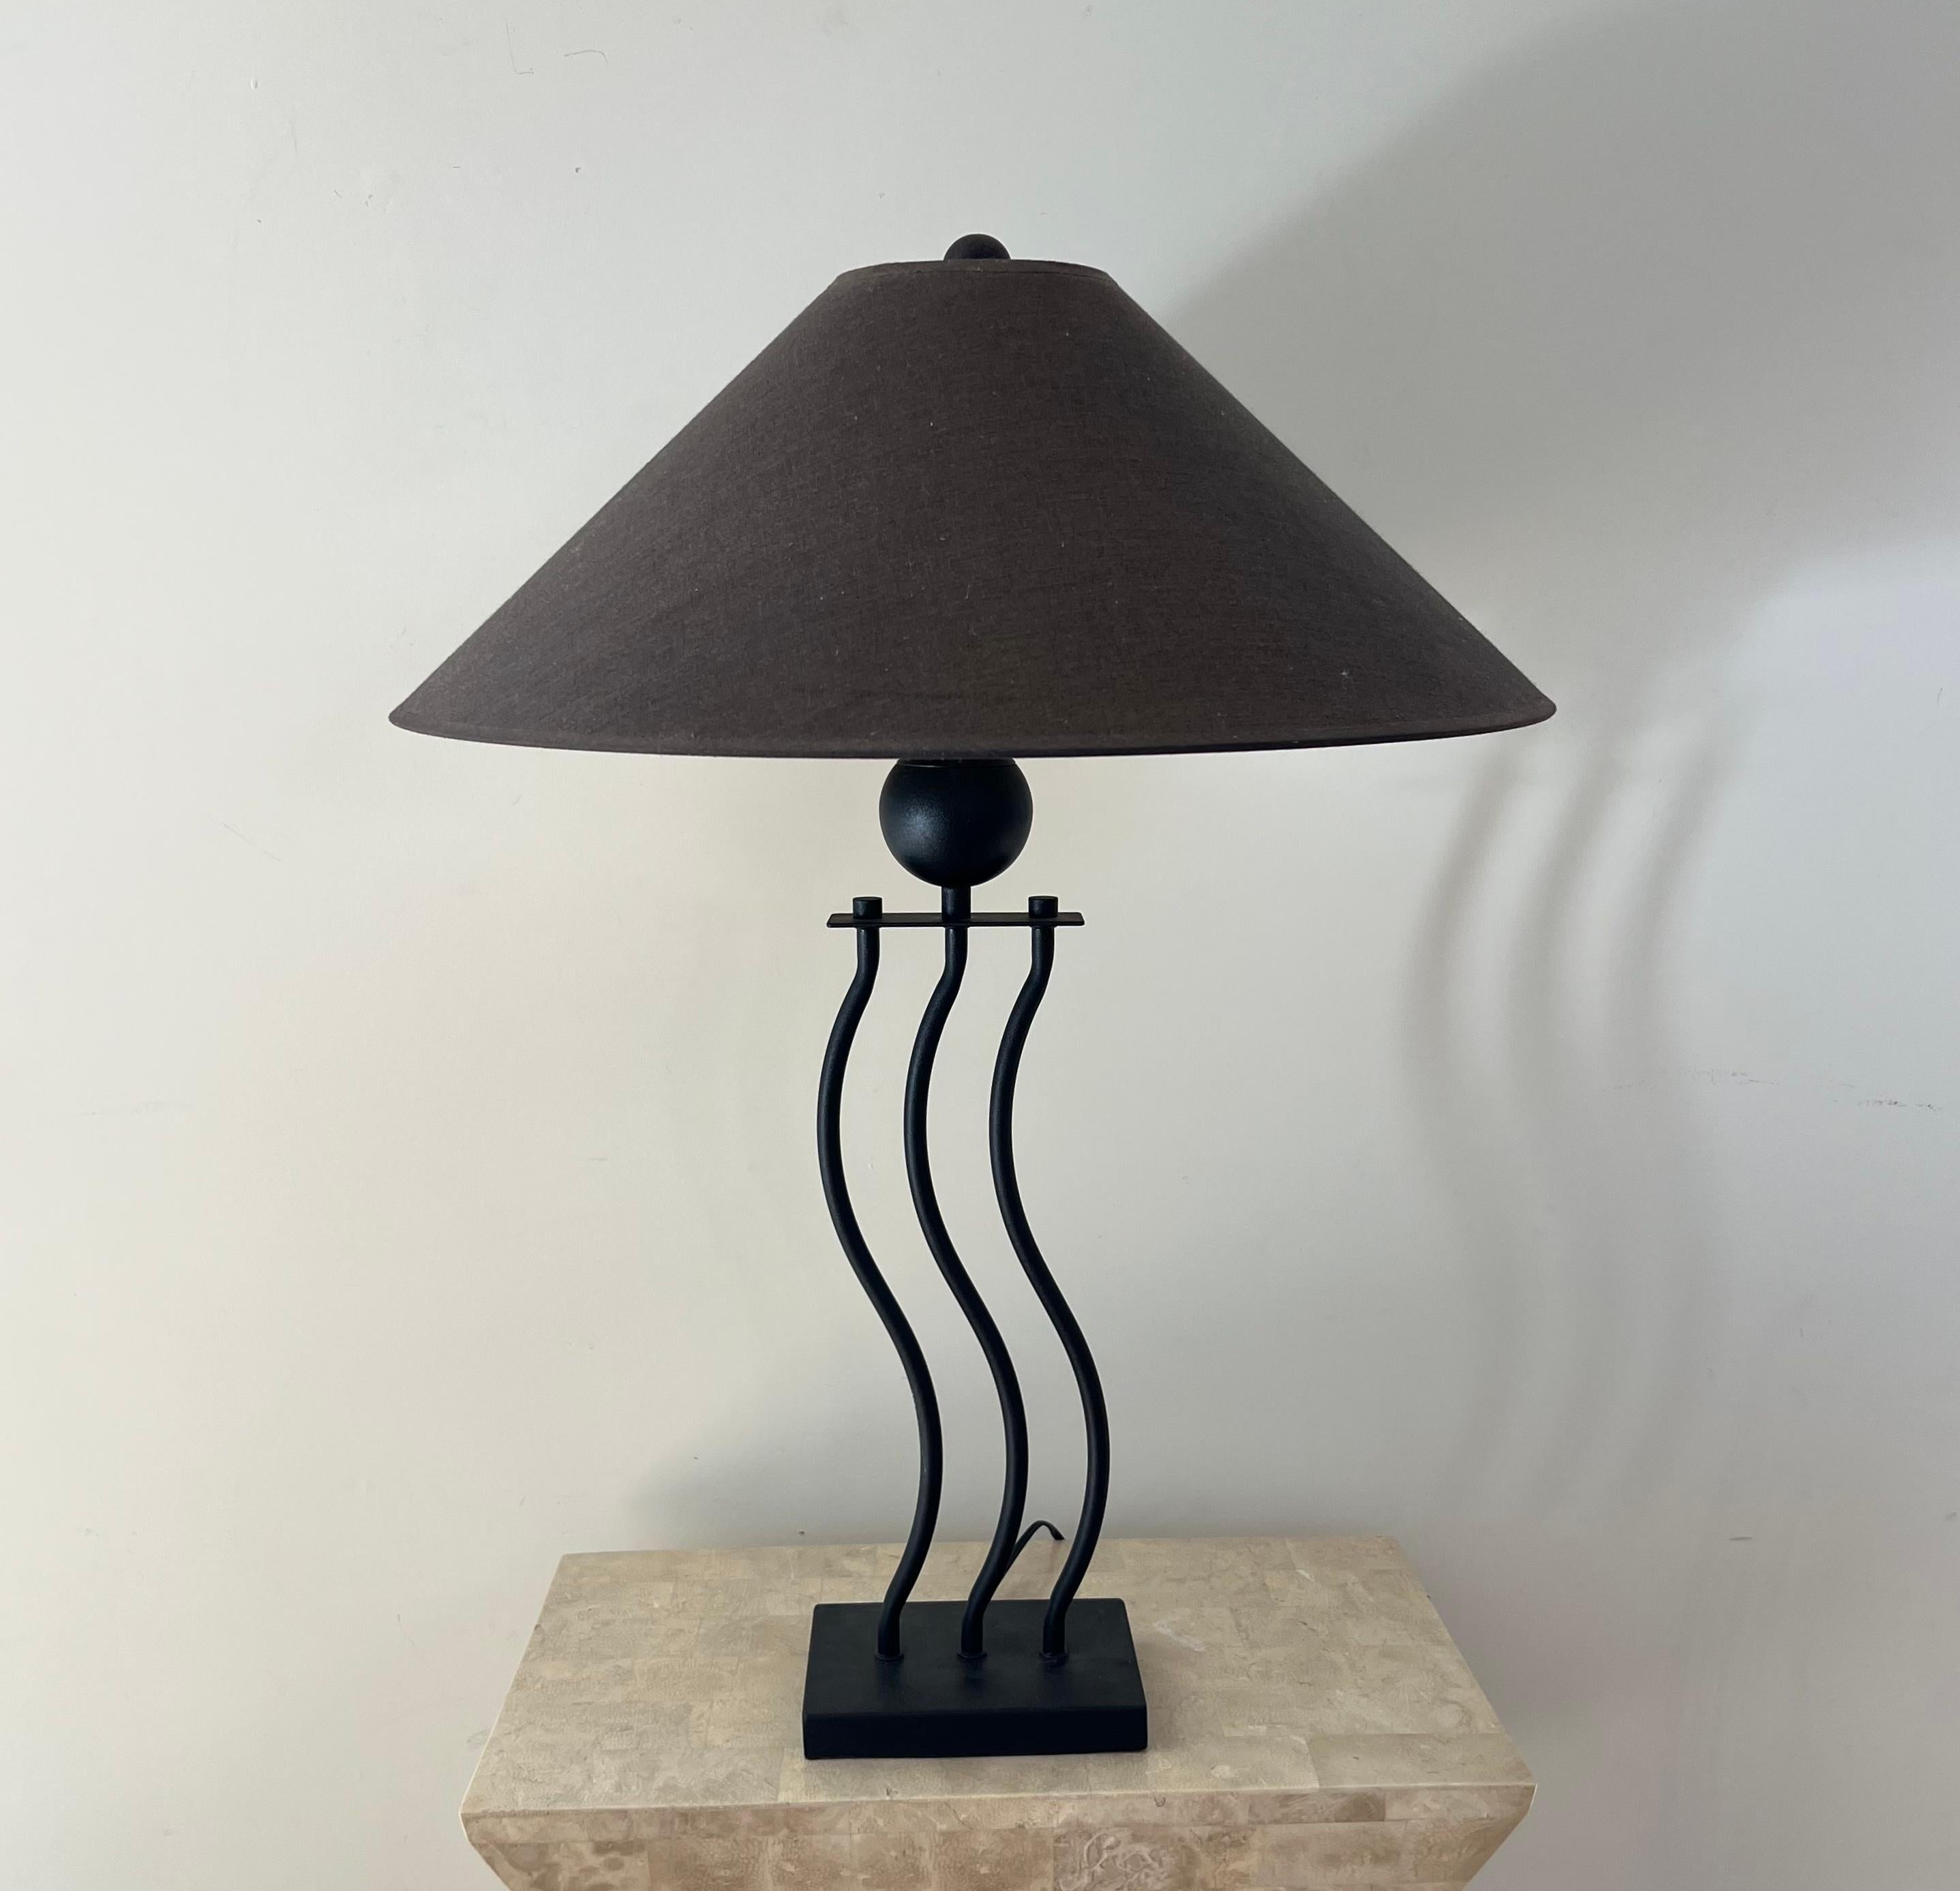 A squiggle table lamp by Underwriter’s Lab, circa late 1980s or early 1990s. Memphis Milano sensibilities. Original shade, works like a dream. Pick up in LA or worldwide delivery available.
Dimensions:
29.75” height, 21.5” diameter; base is 5” x